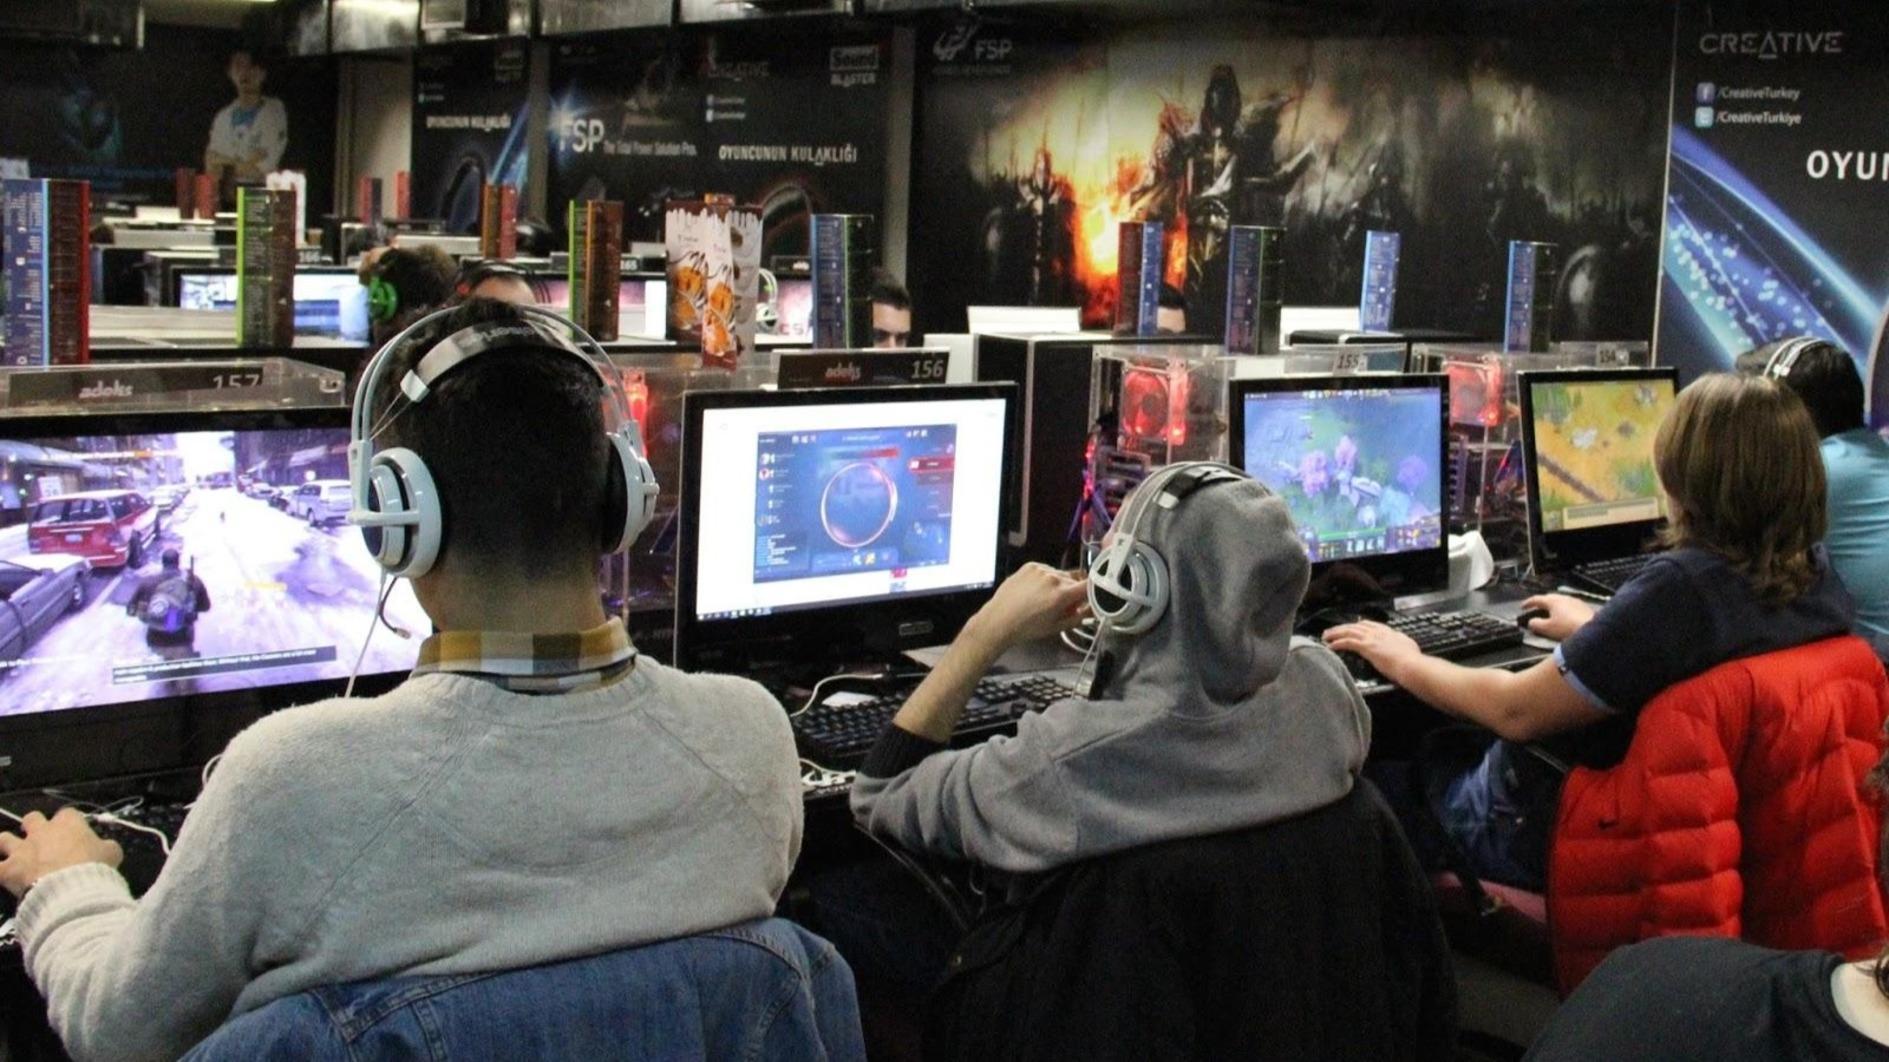 Internet cafes running out of business amid soaring costs